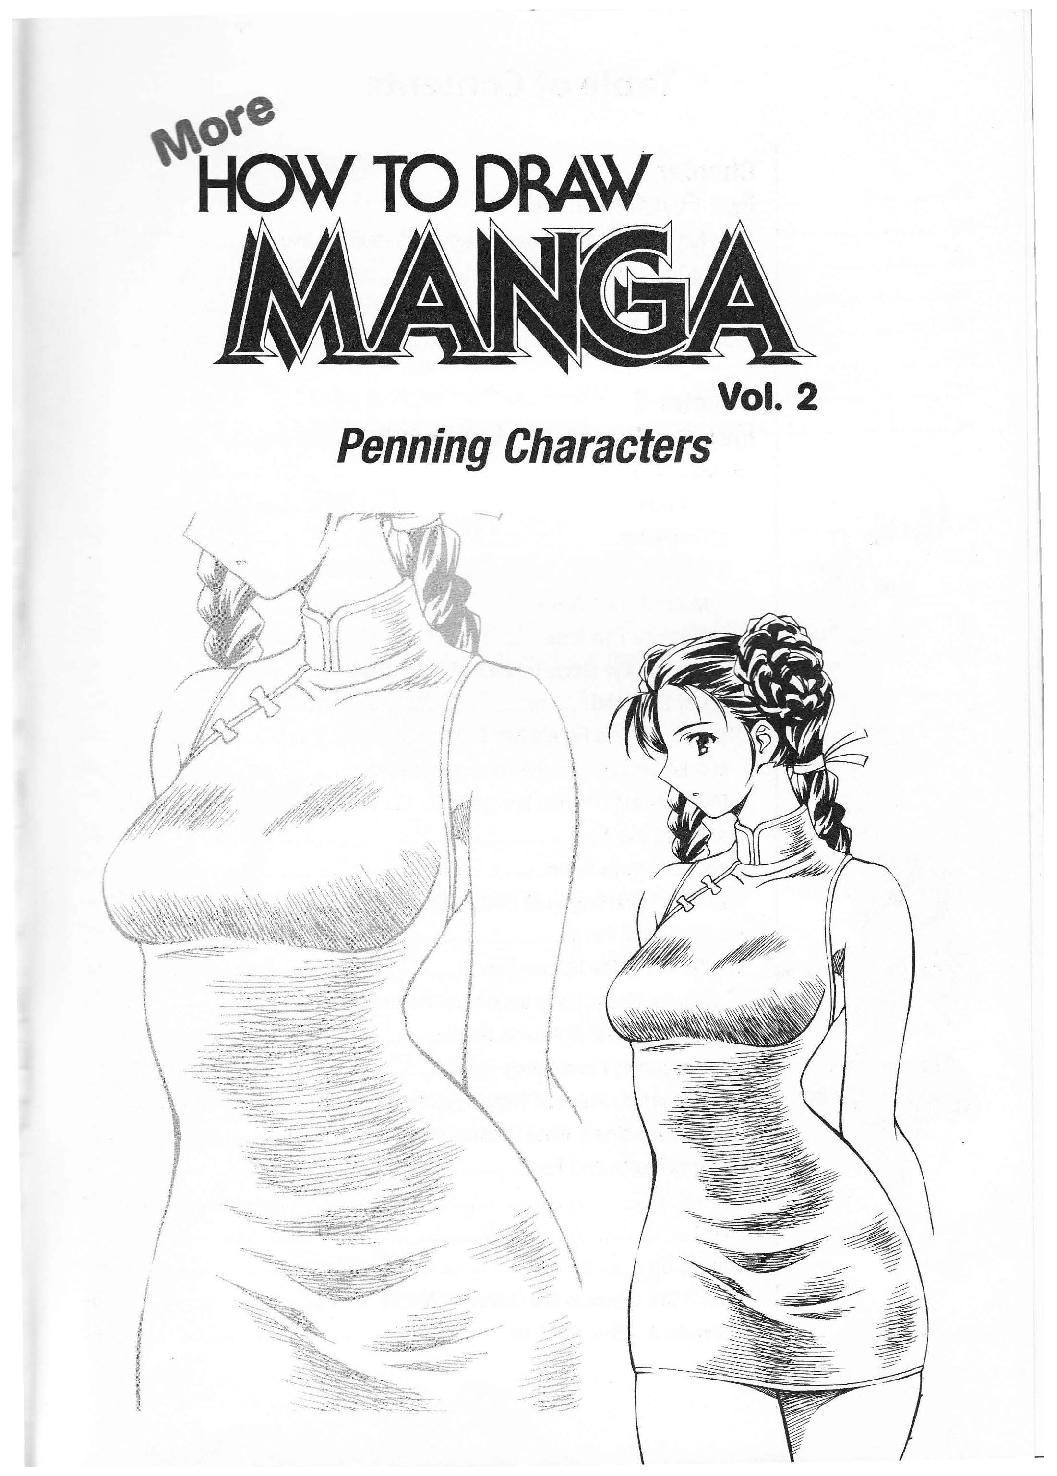 More How to Draw Manga Vol. 2 - Penning Characters 4